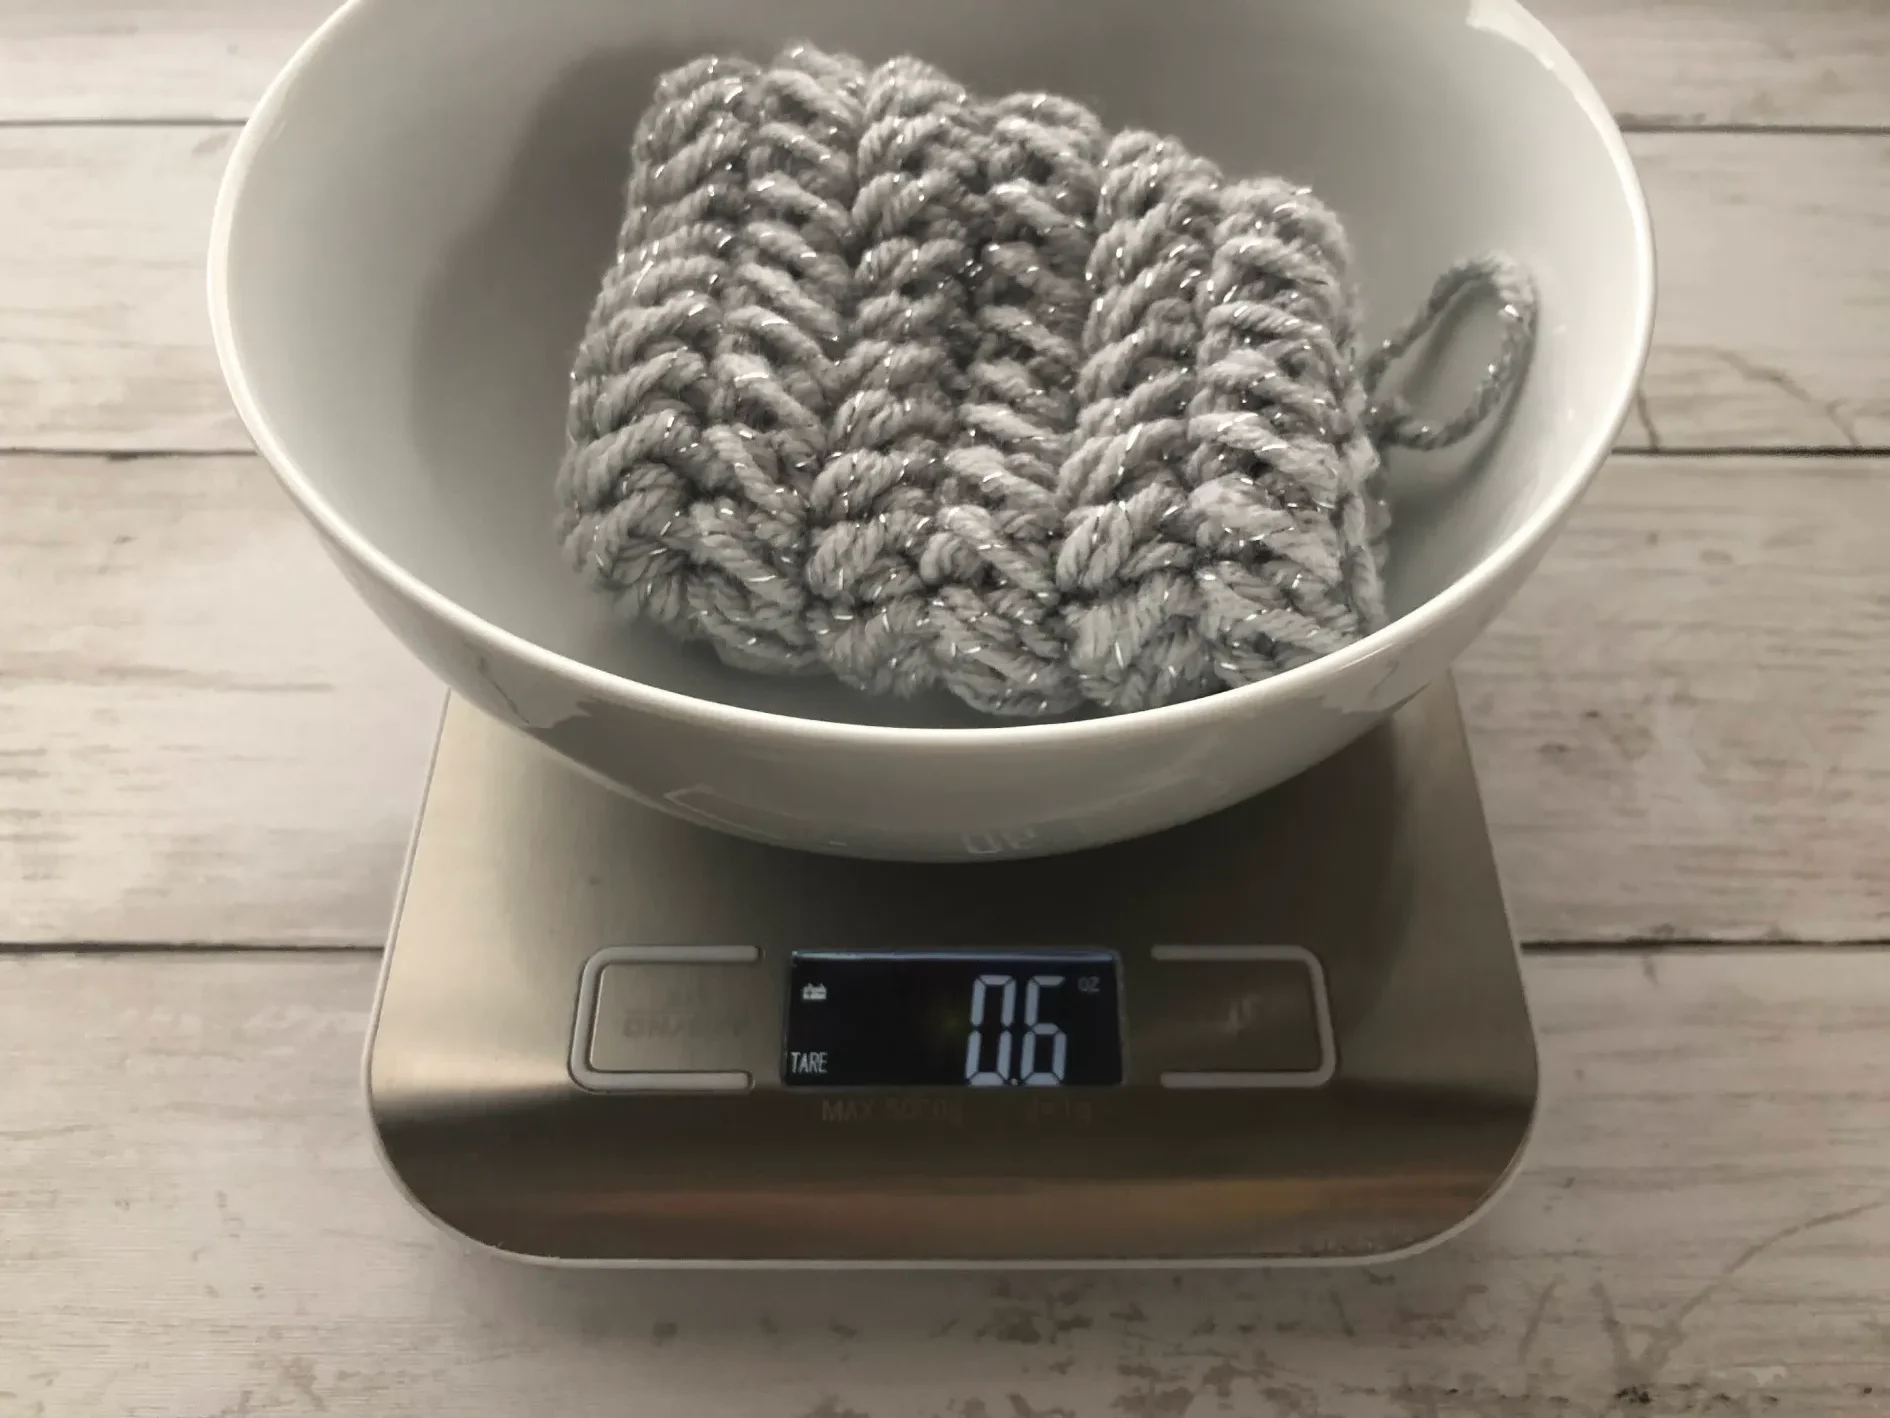 yarn in bowl on scale